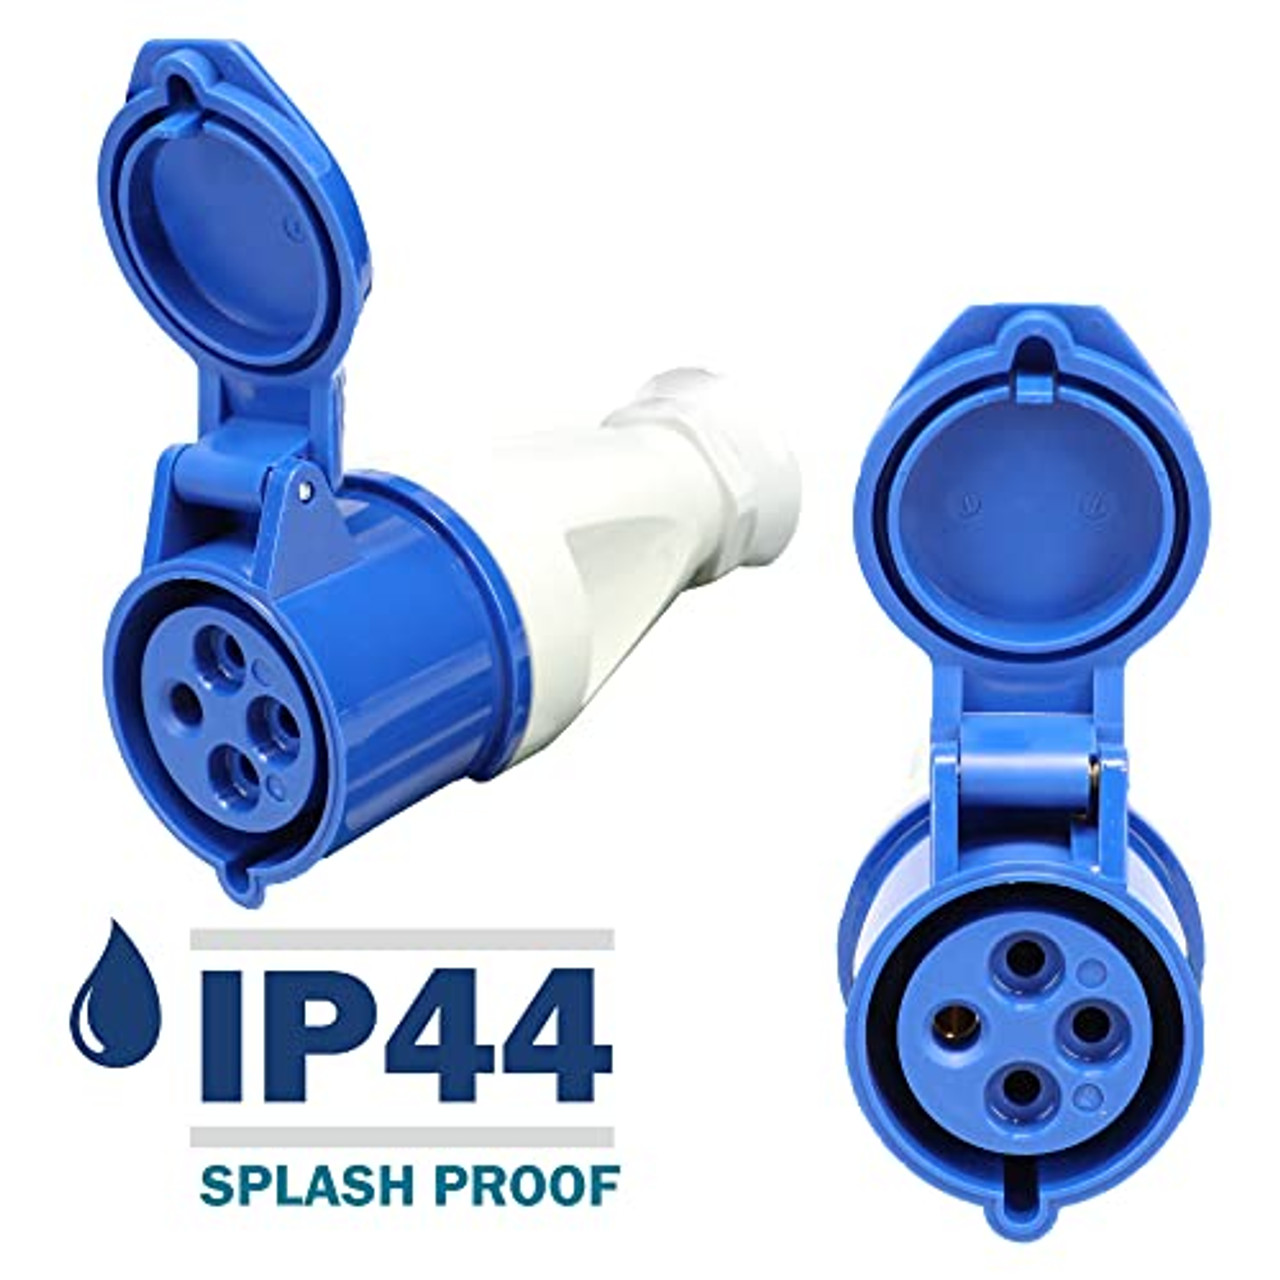 332409 Connector carries an environmental rating of IP44 Splashproof